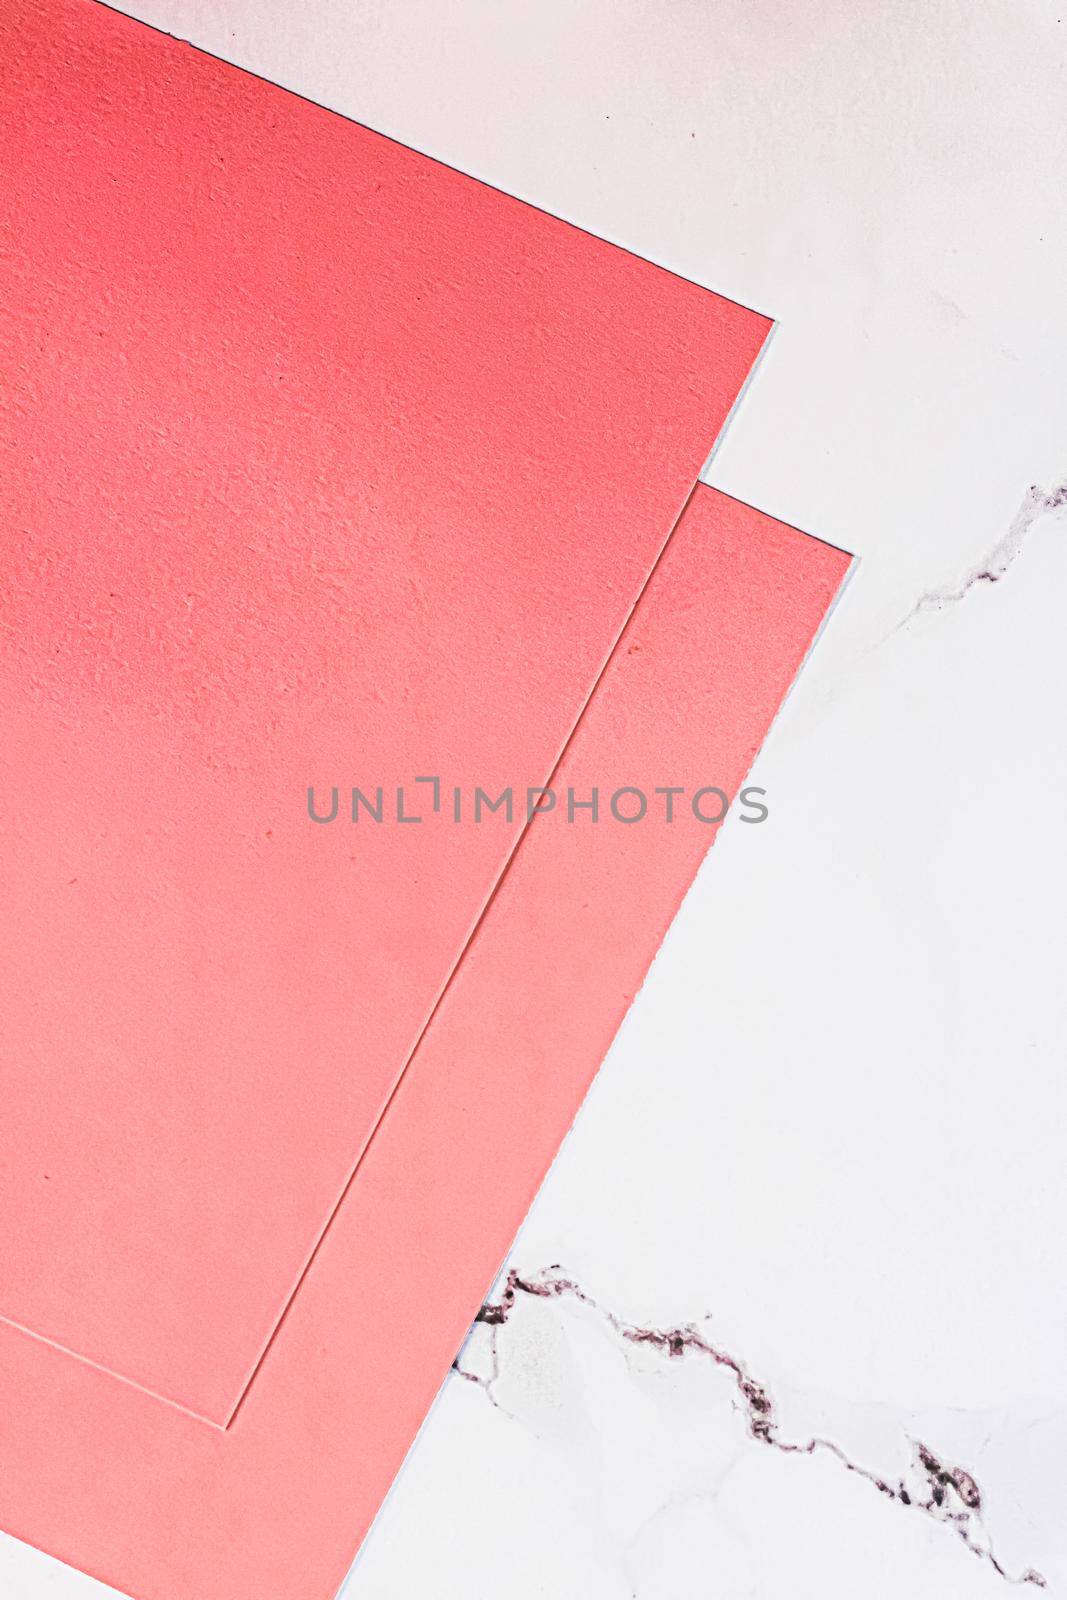 Pink A4 papers on white marble background as office stationery flatlay, luxury branding flat lay and brand identity design for mockup by Anneleven